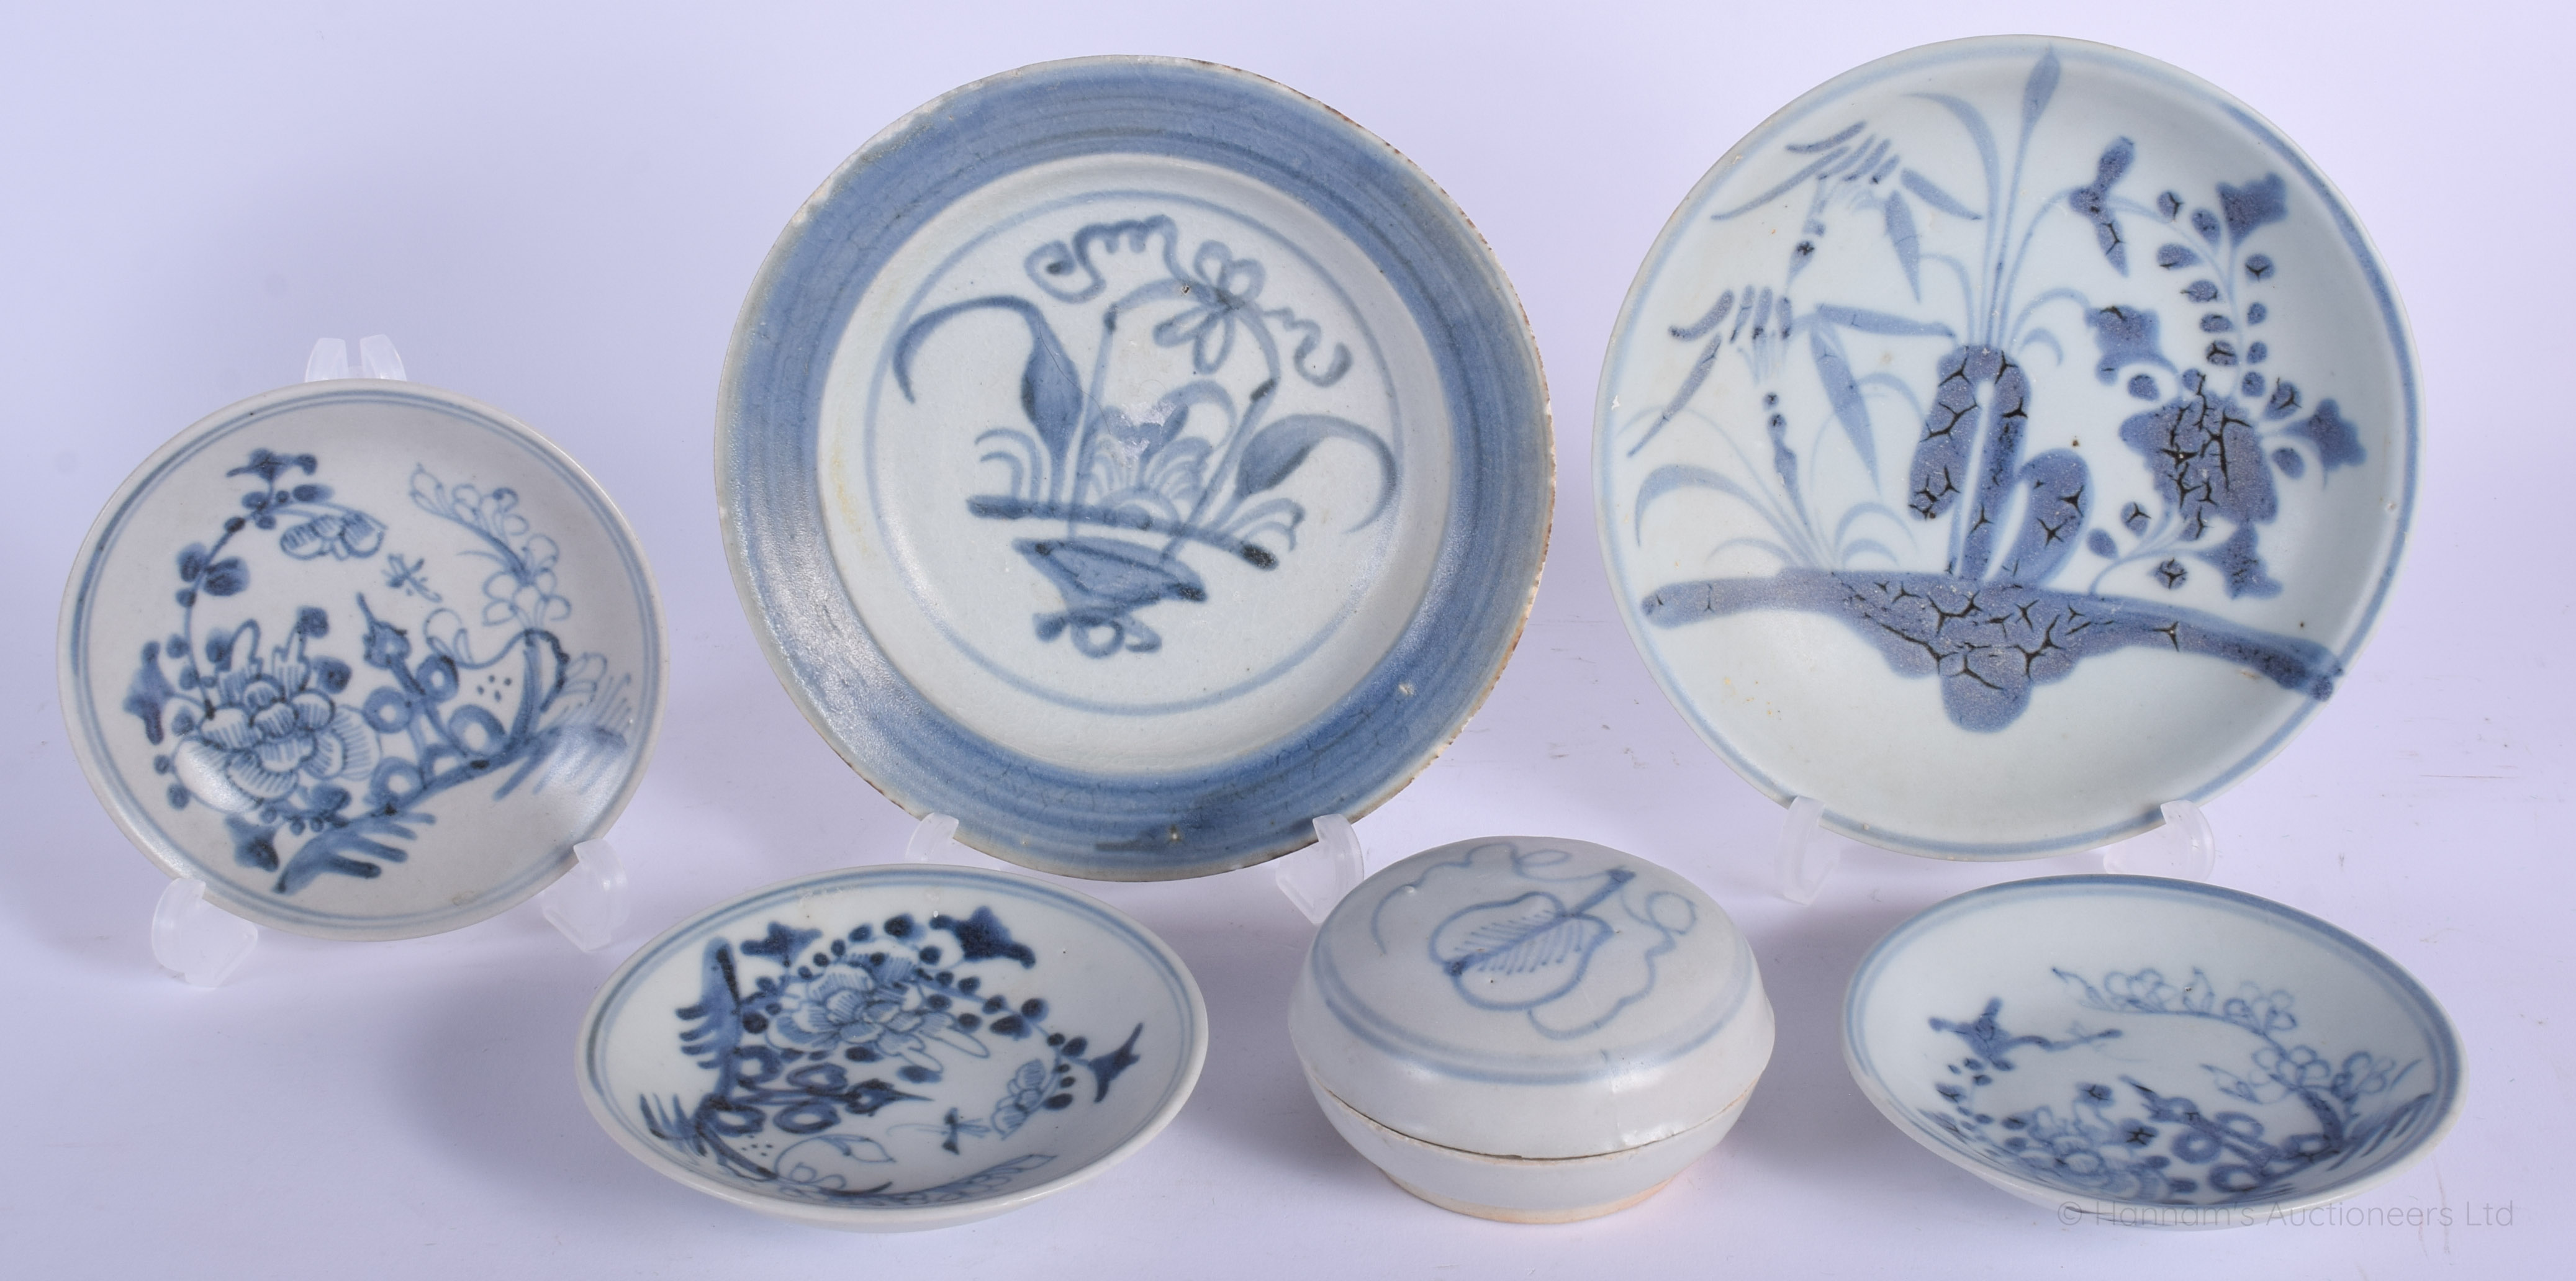 THREE CHINESE TEK SING CARGO PORCELAIN SAUCERS together with plates etc. Largest 12 cm wide. (6)